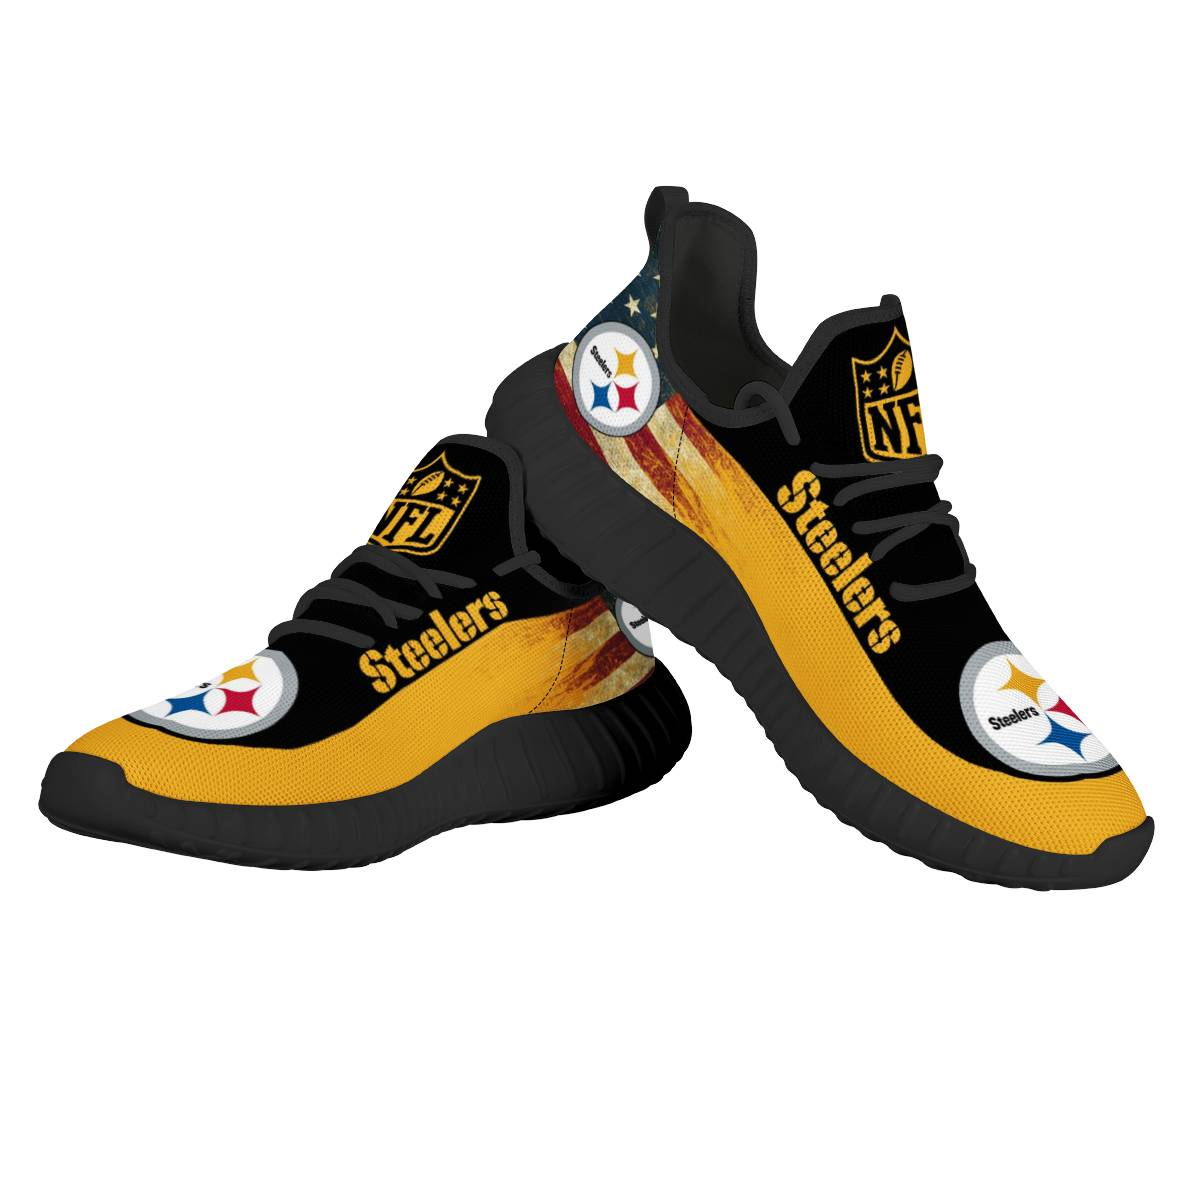 Women's NFL Pittsburgh Steelers Mesh Knit Sneakers/Shoes 006